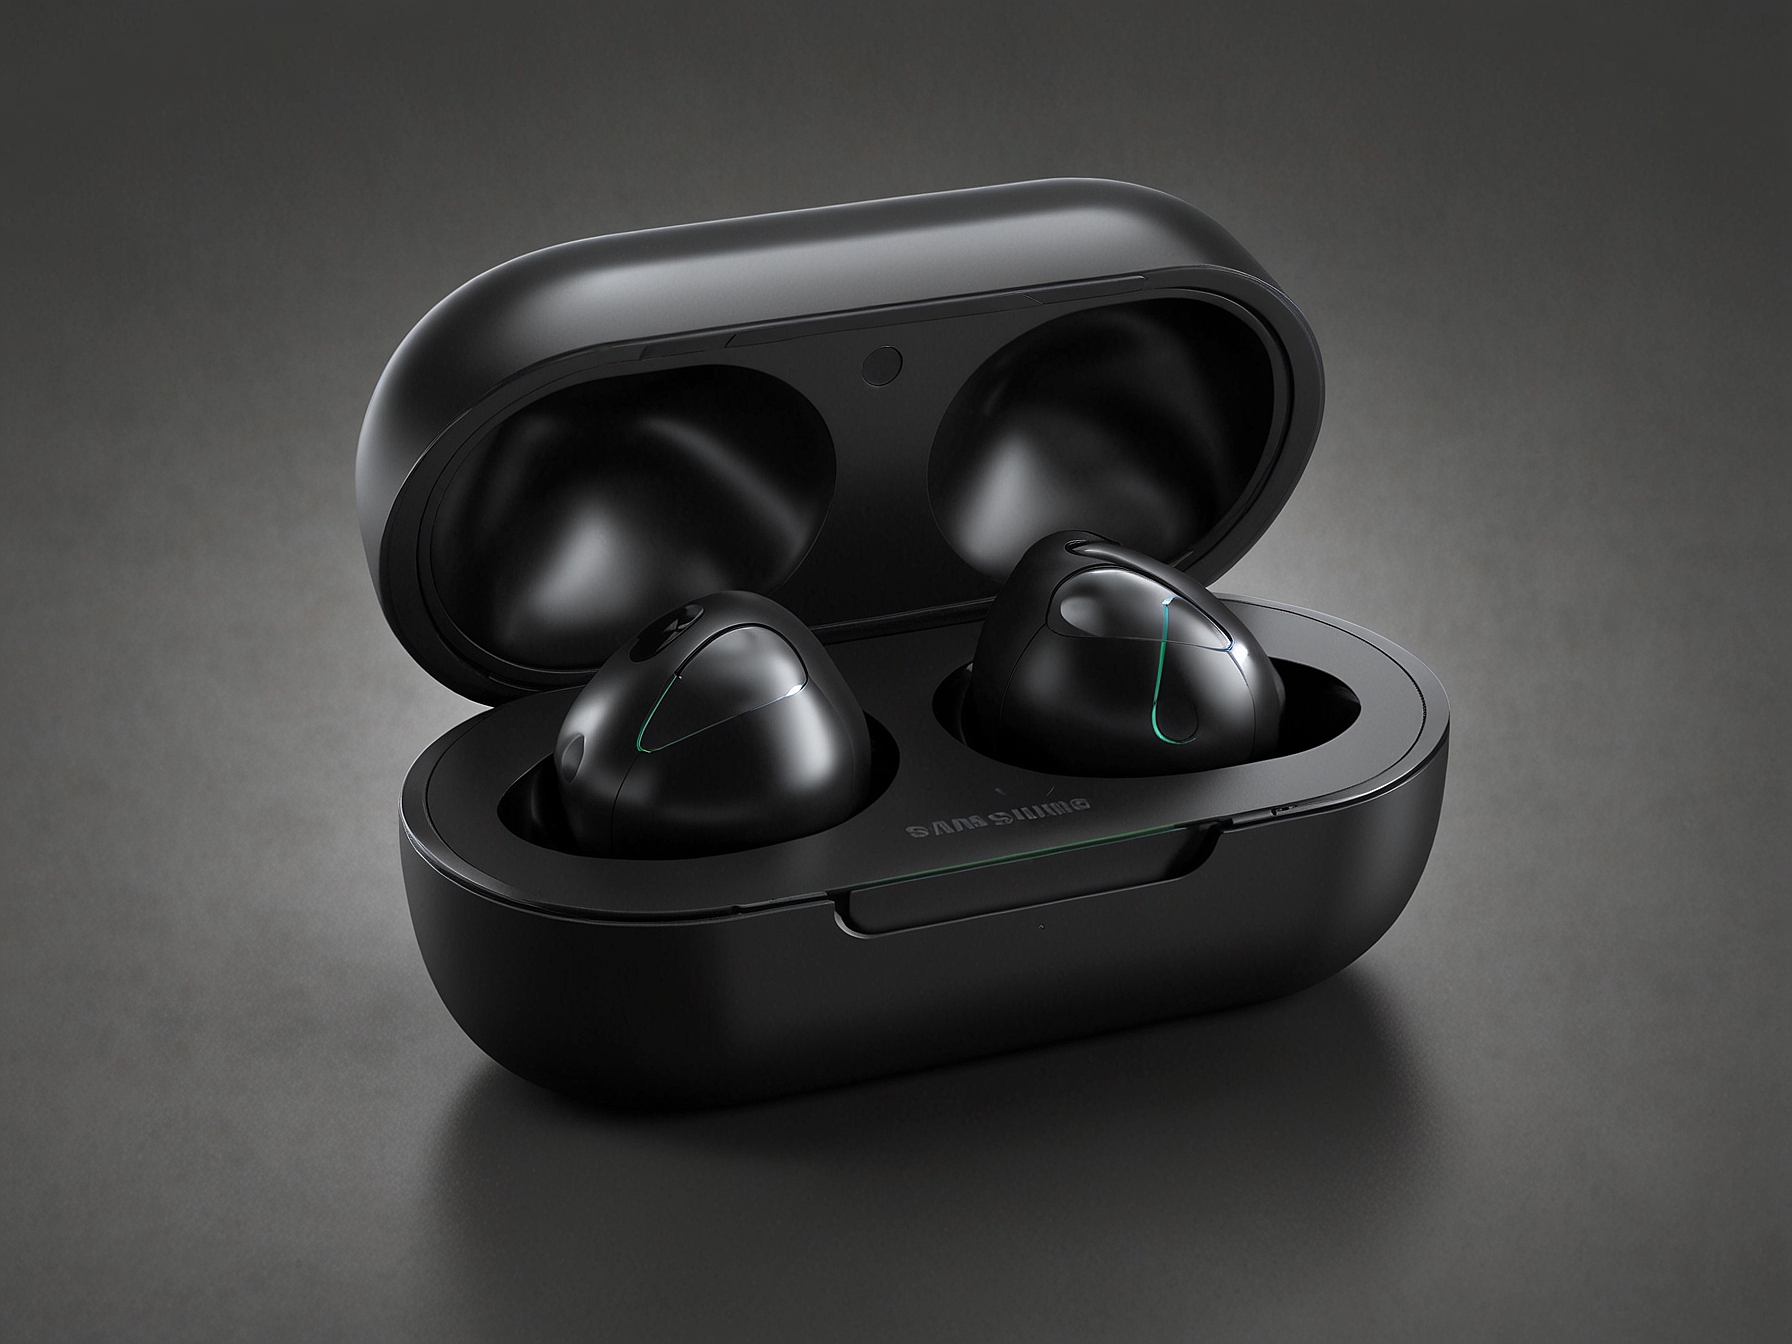 A pair of Samsung Galaxy earbuds nestled in their sleek charging case, showcasing their modern, compact design that offers both aesthetic appeal and functionality.